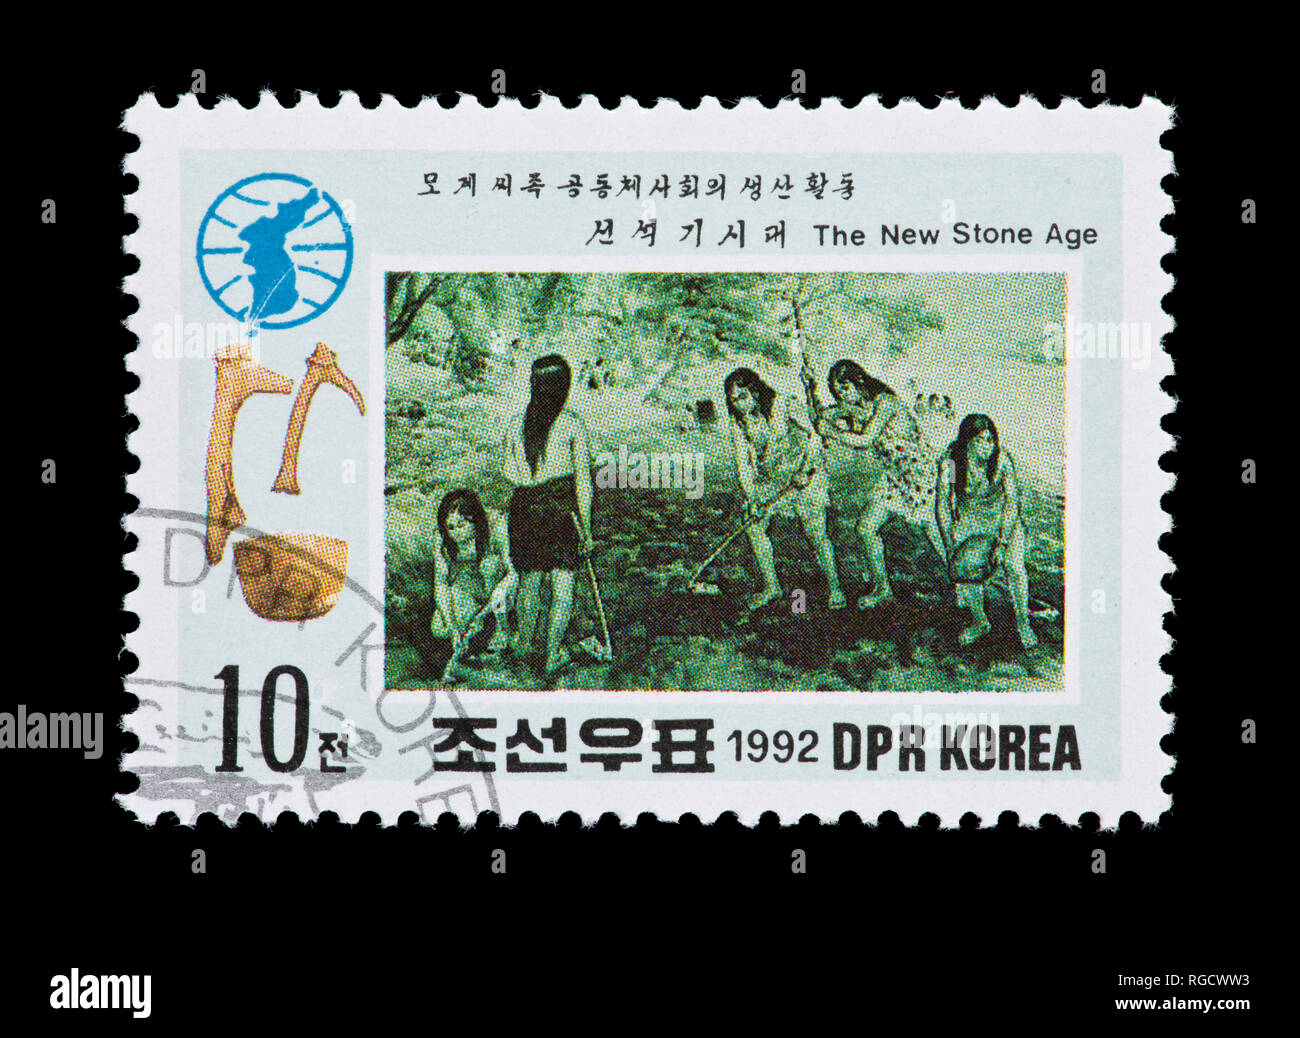 Postage stamp from North Korea depicting prehistoric people planting crops. Stock Photo